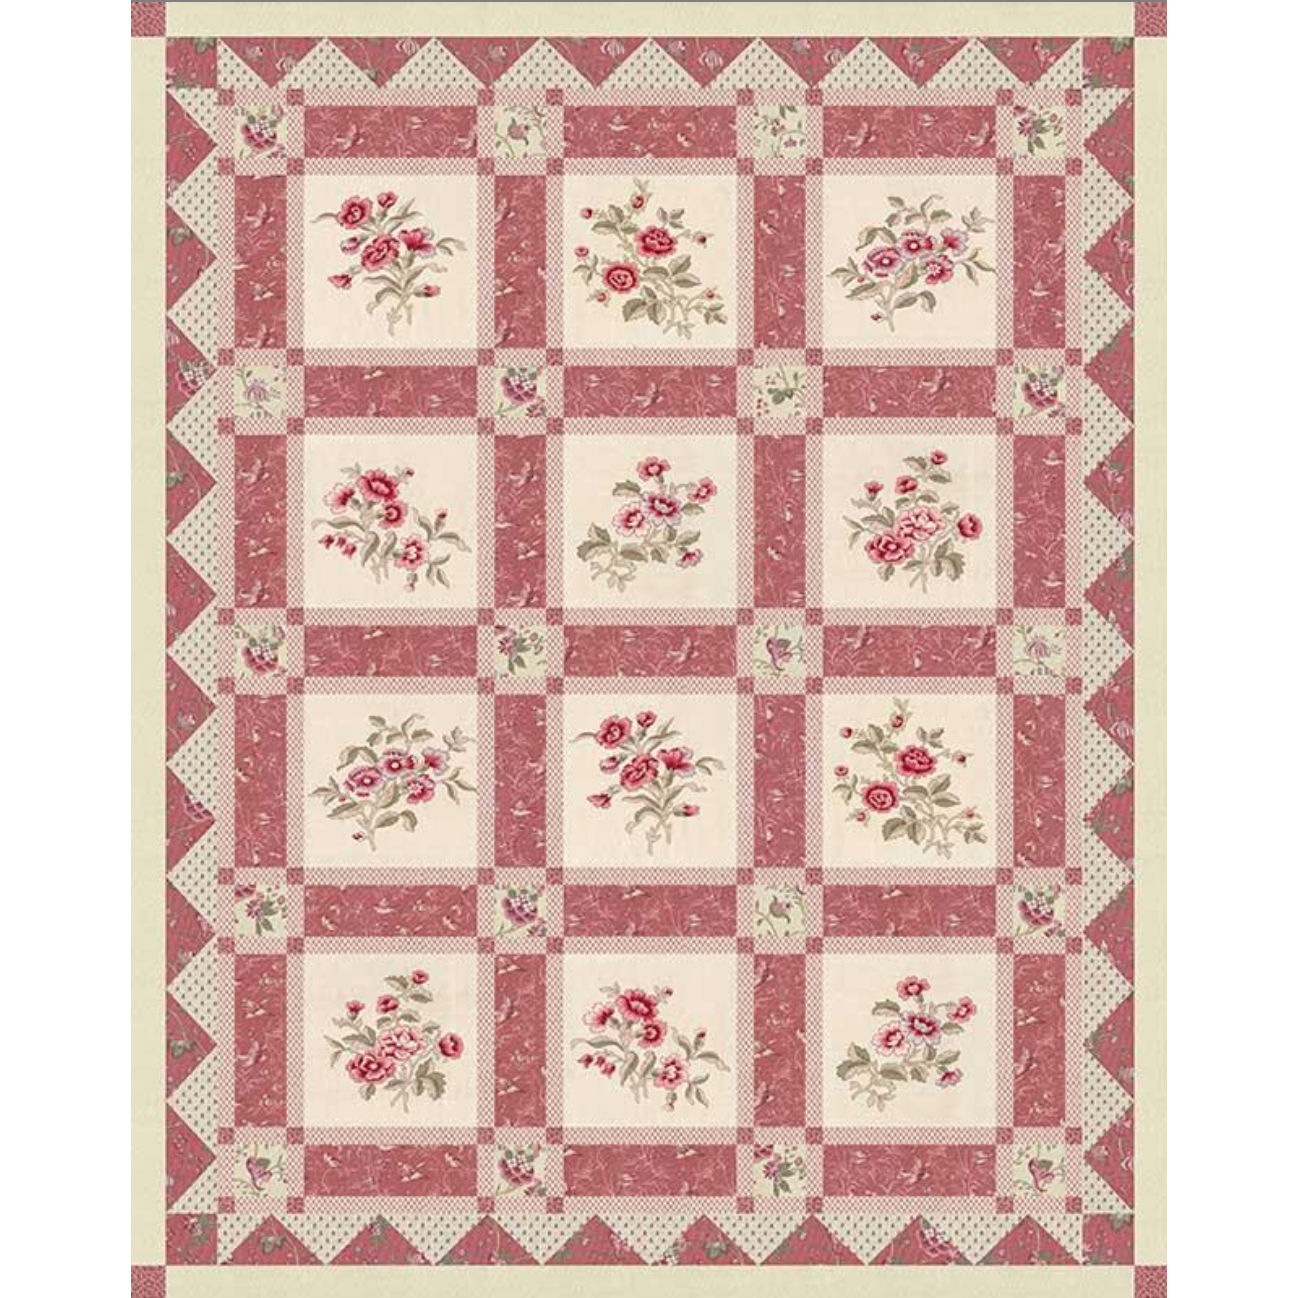 French General ~ The Queen's Grove Quilt Pattern